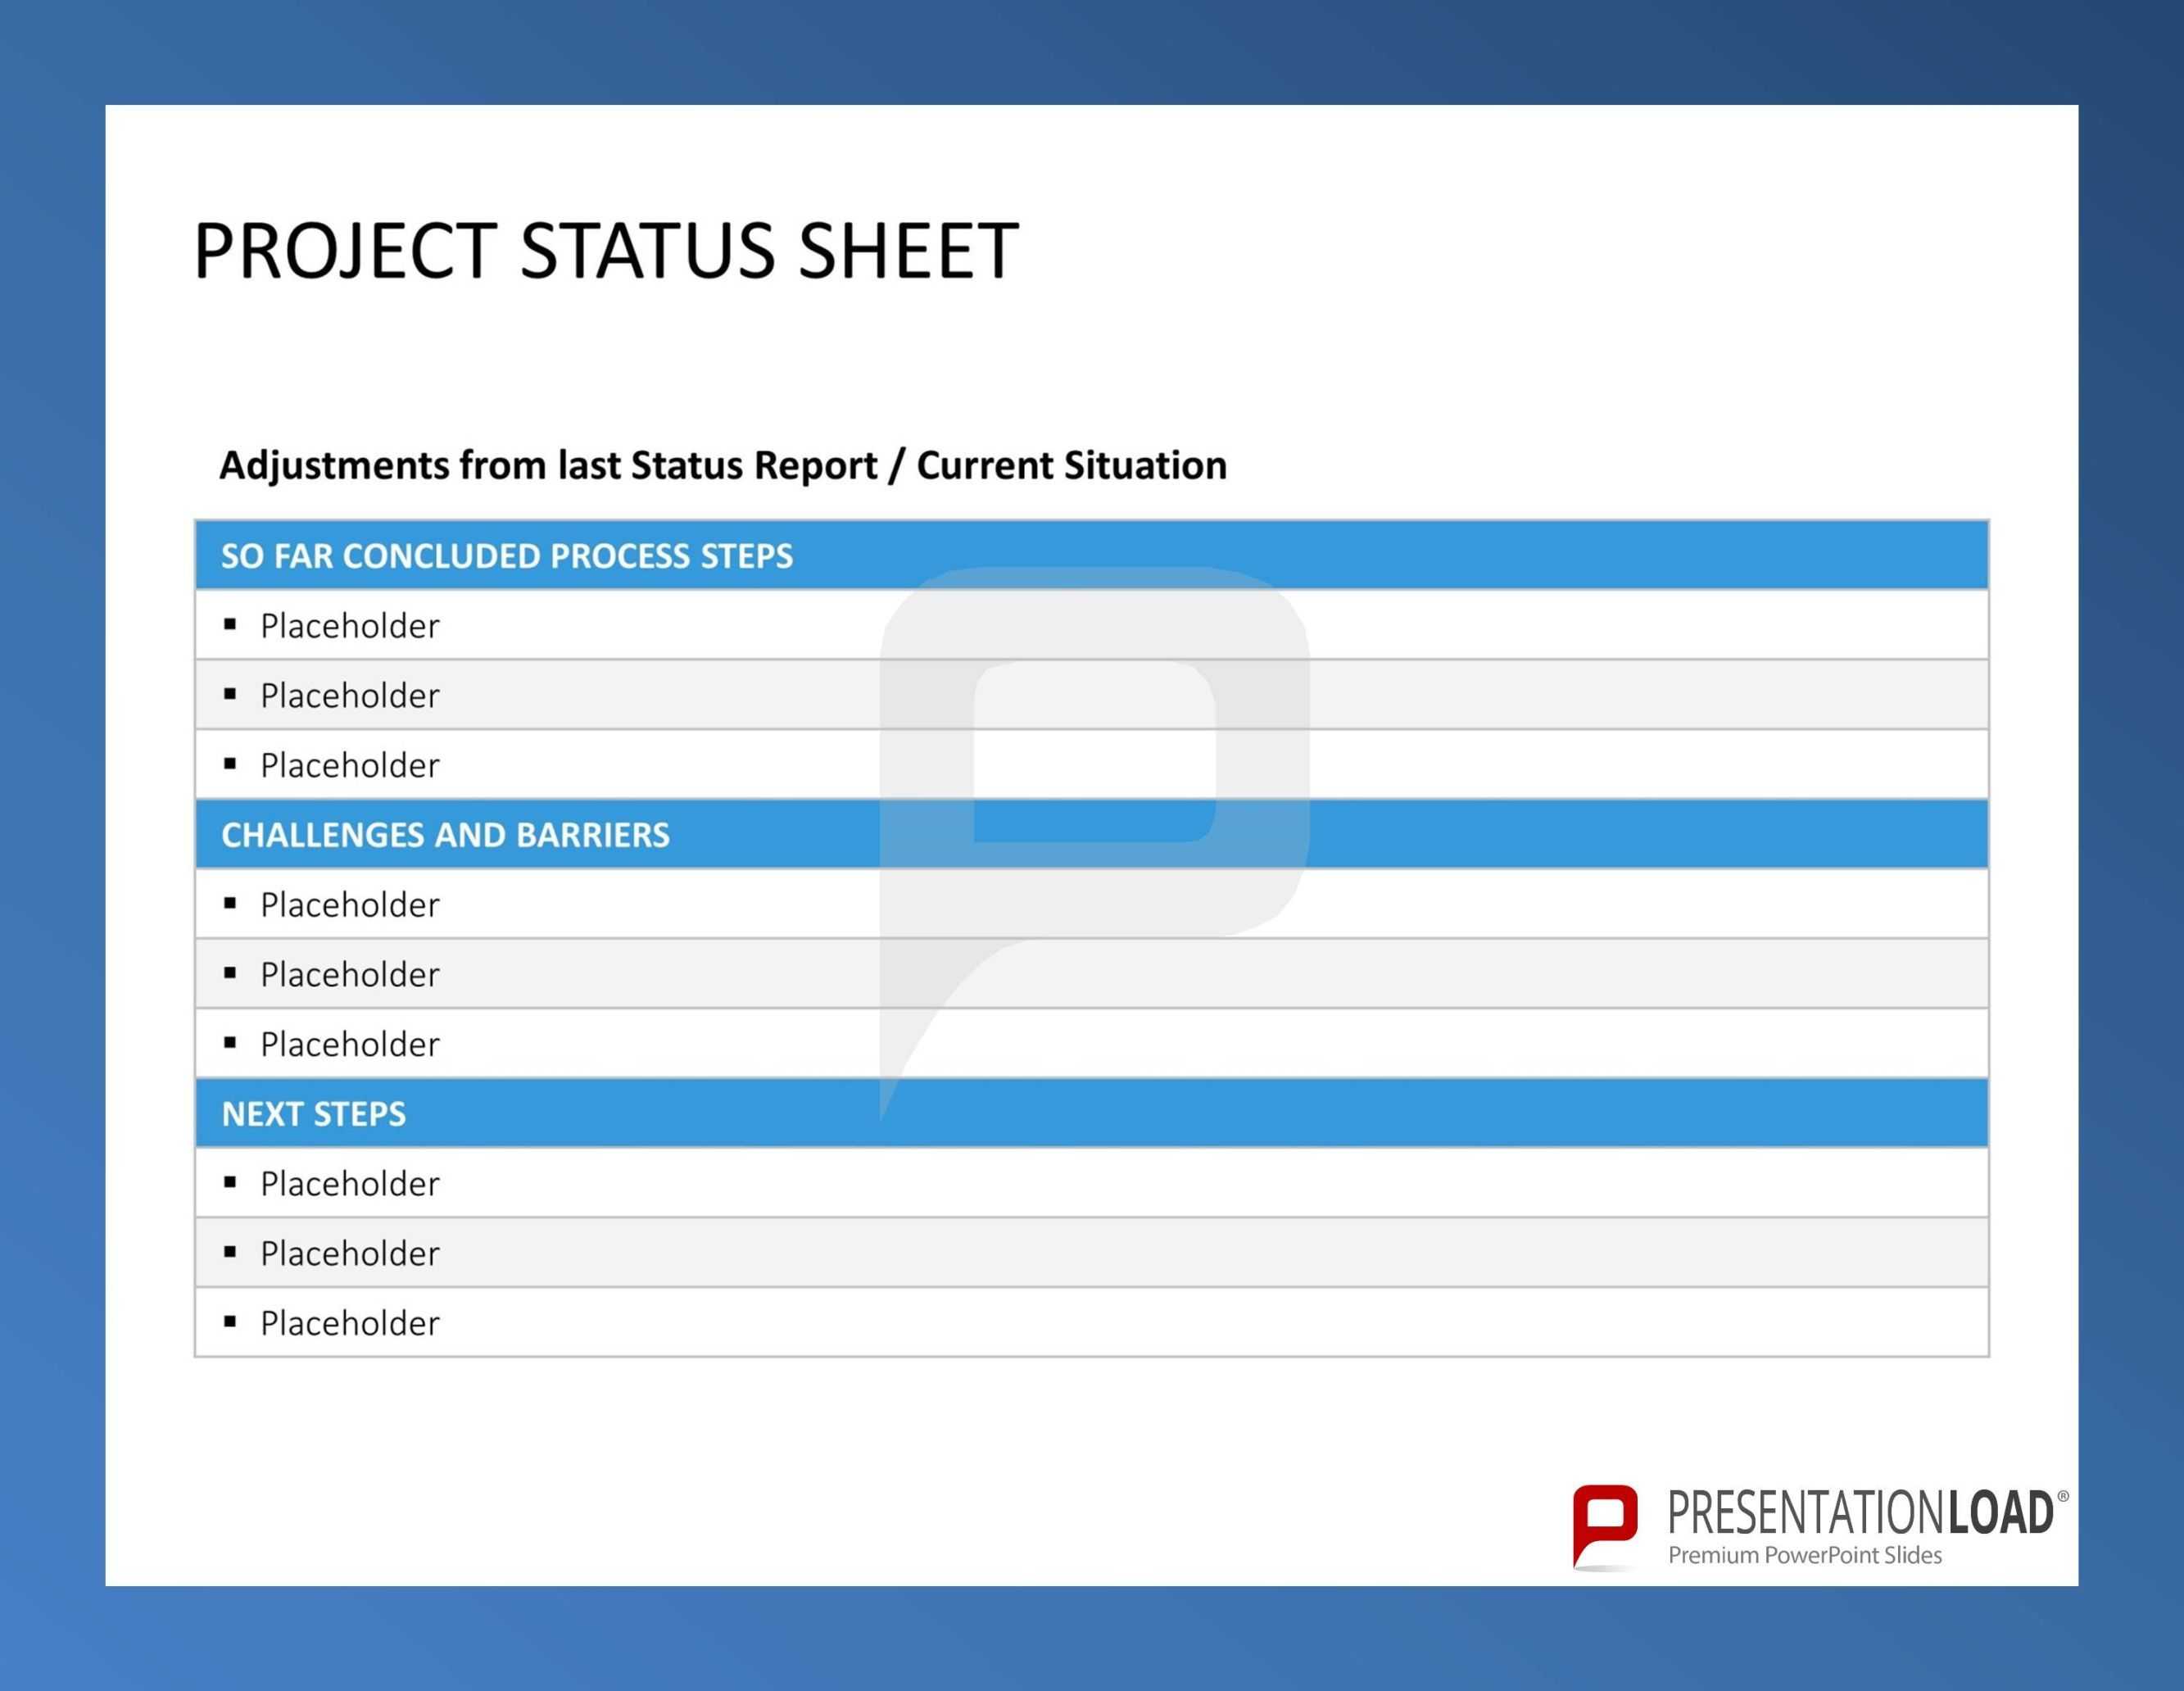 Pinpresentationload On Quality Management // Powerpoint In Weekly Project Status Report Template Powerpoint